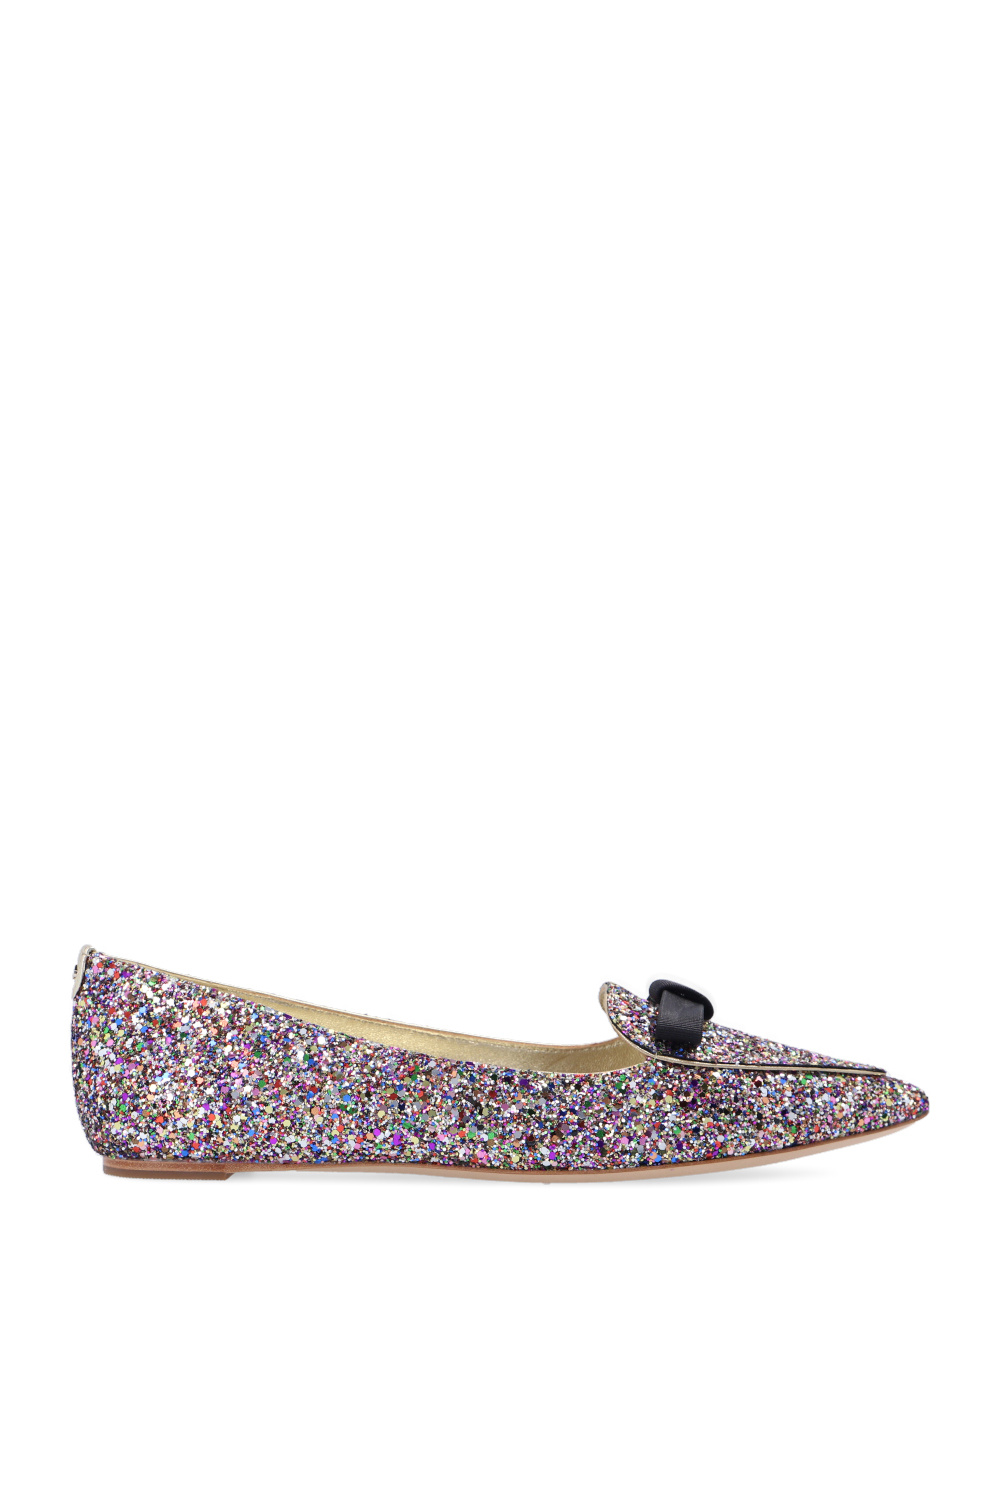 Kate Spade ‘Poppy’ ballet flats with bow